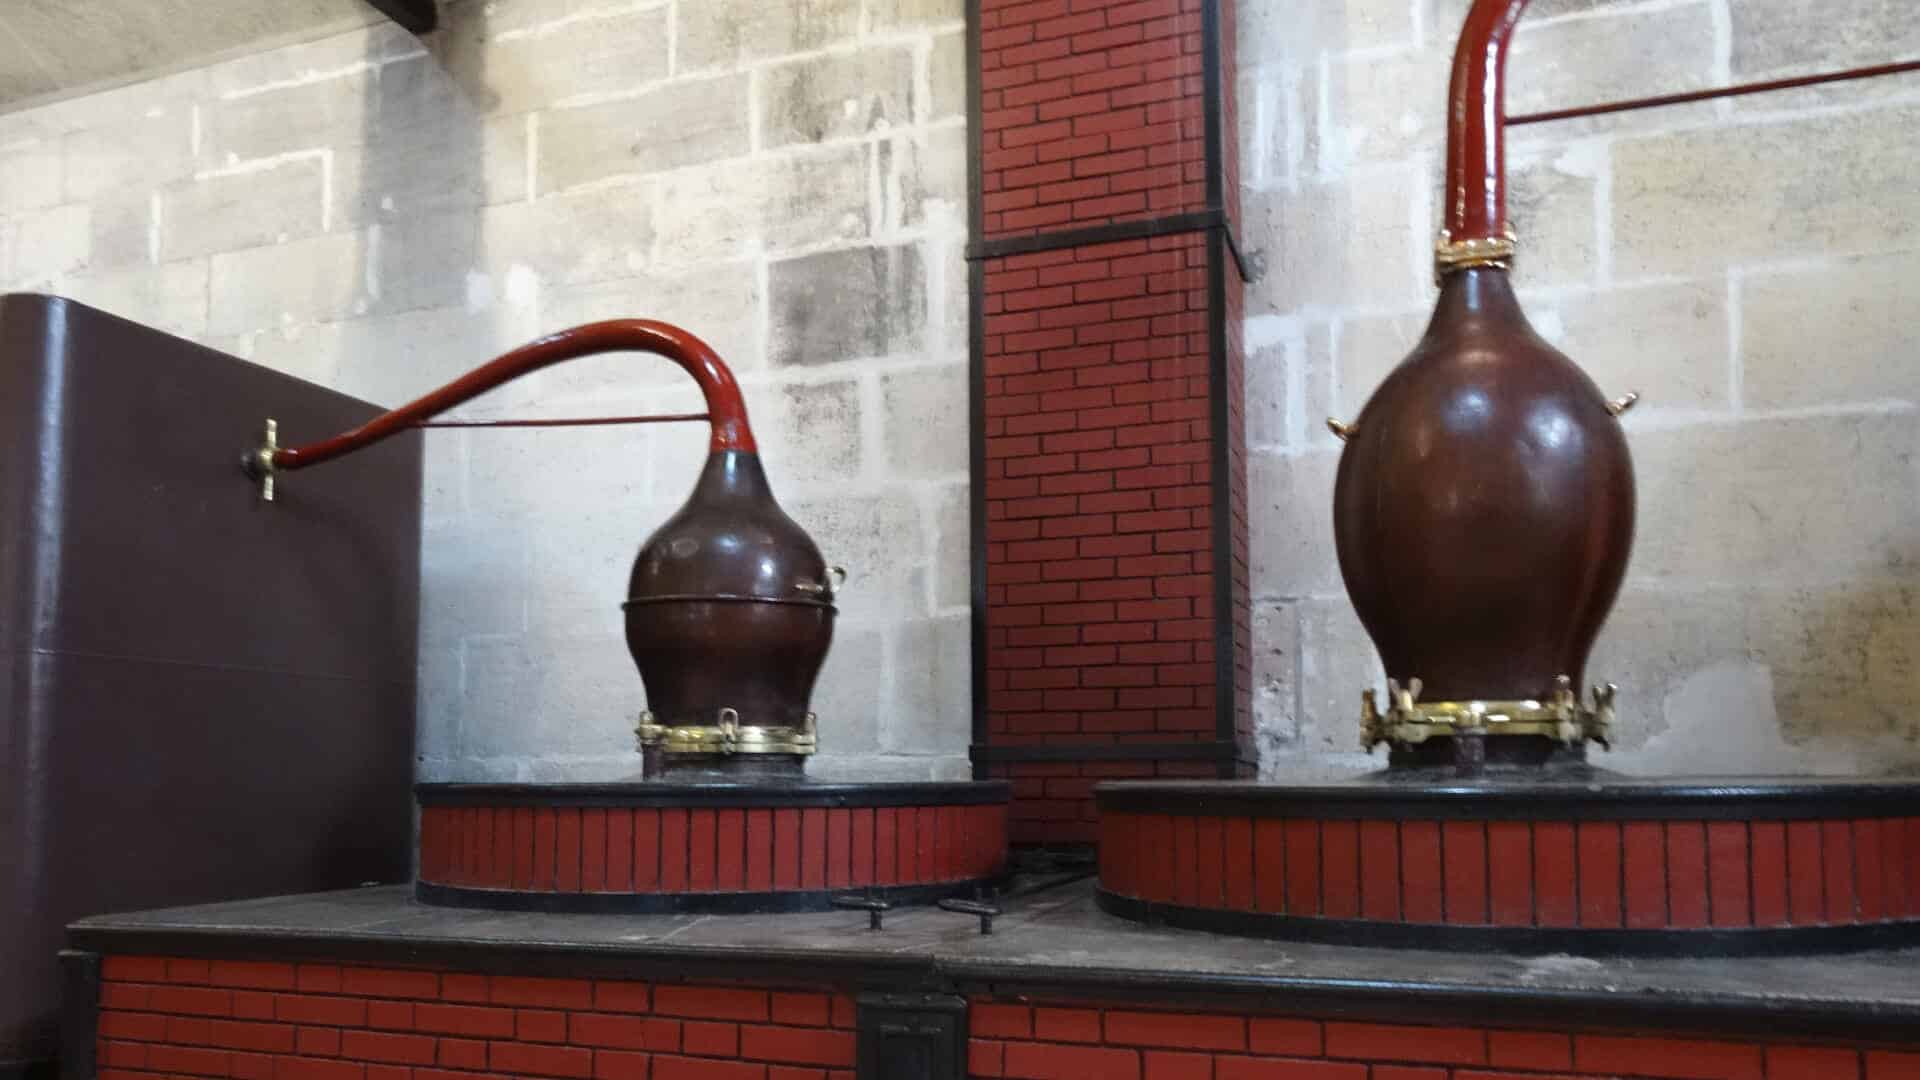 Old wood-fired stills with an onion shape head capital for cognac